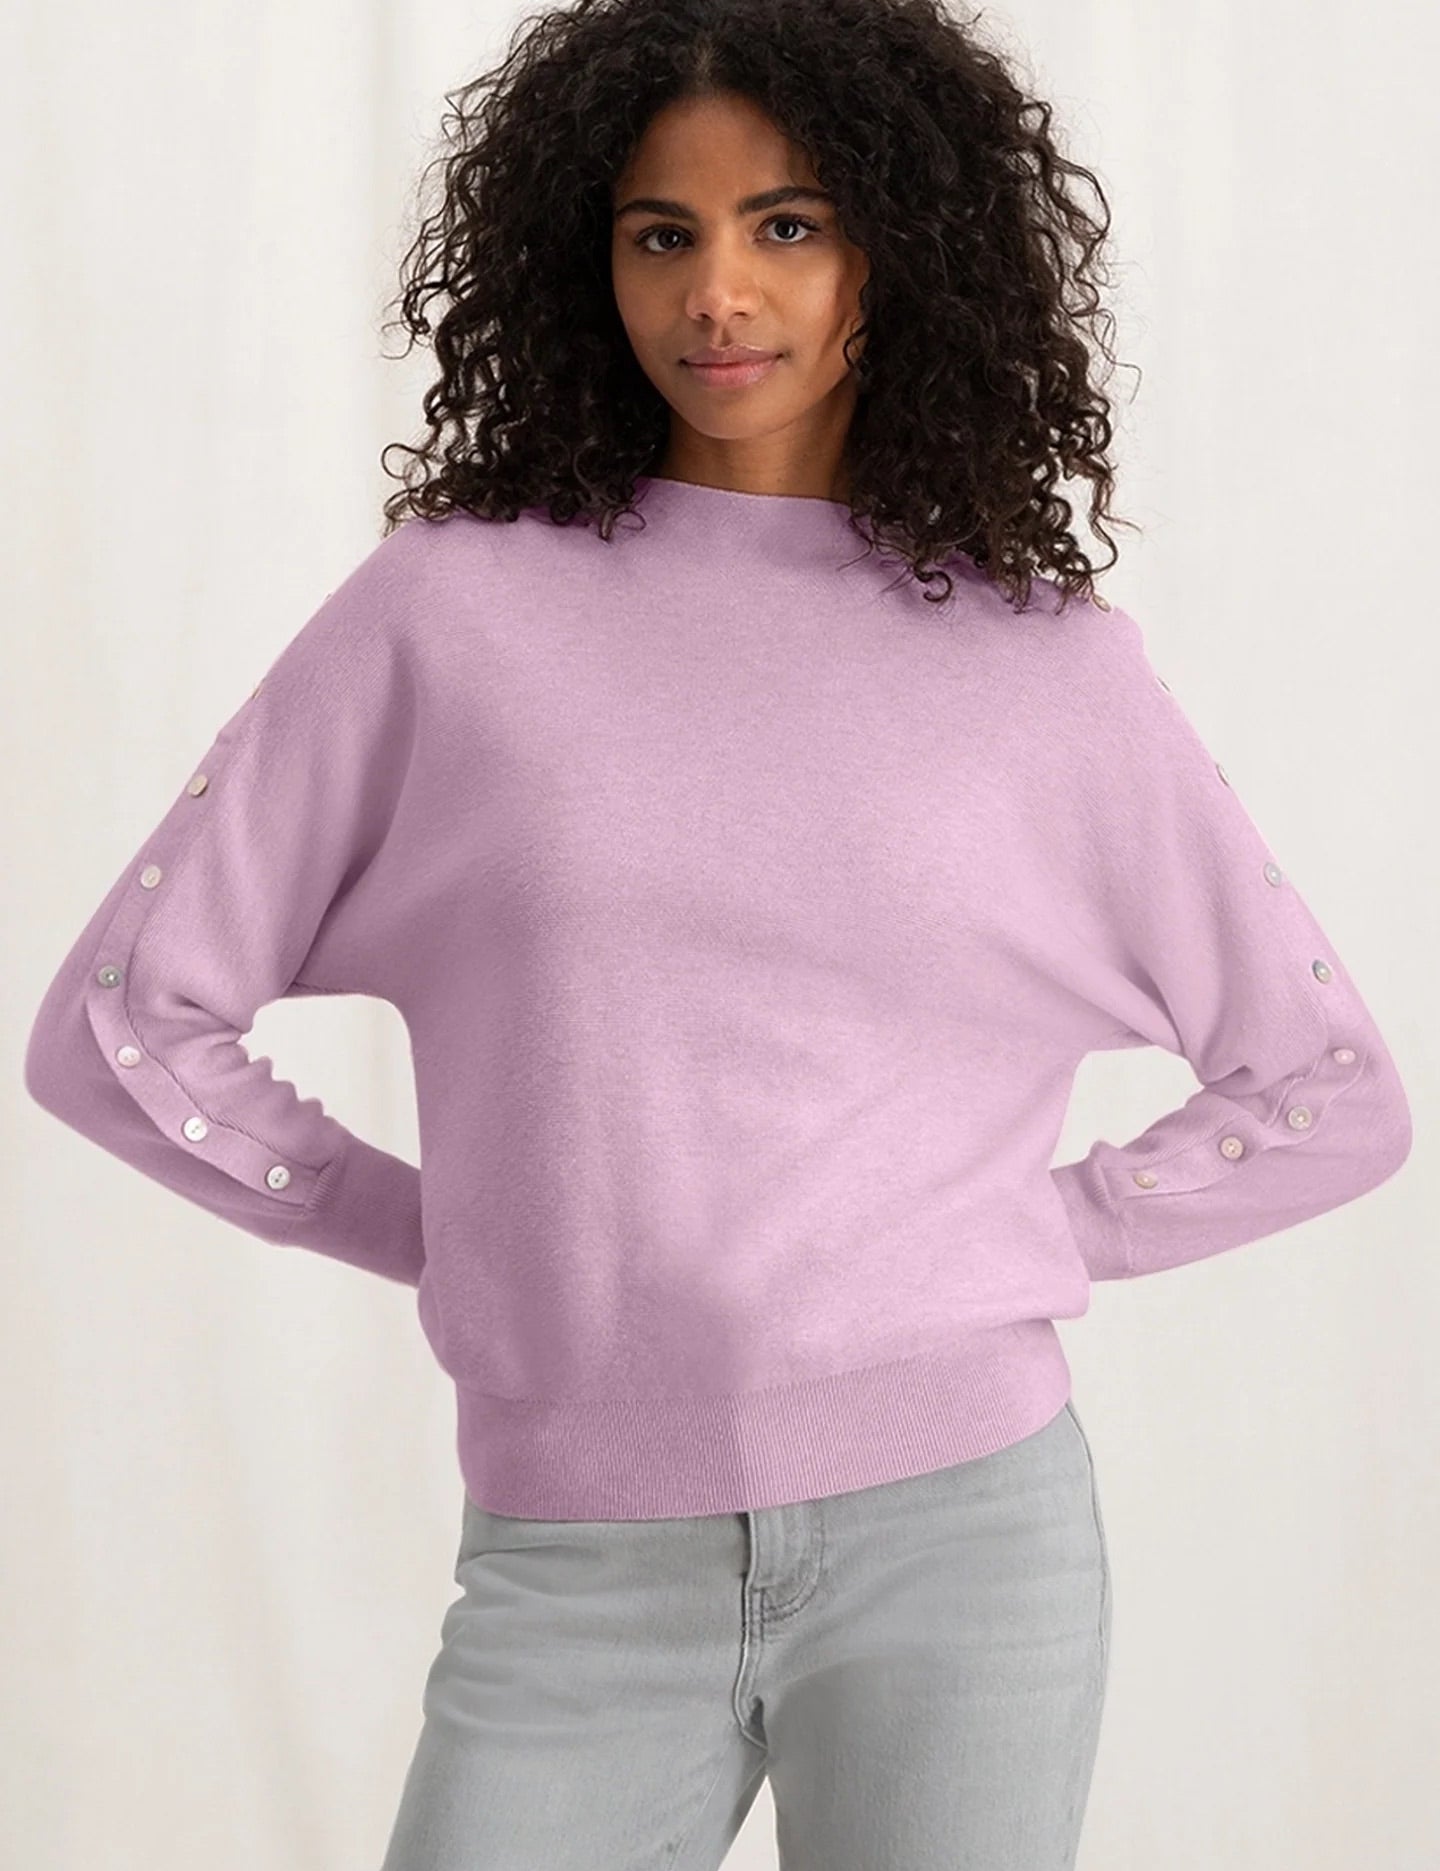 sweater-with-boatneck-long-sleeves-and-button-details-lady-pink-melange_2880x_jpg.jpg